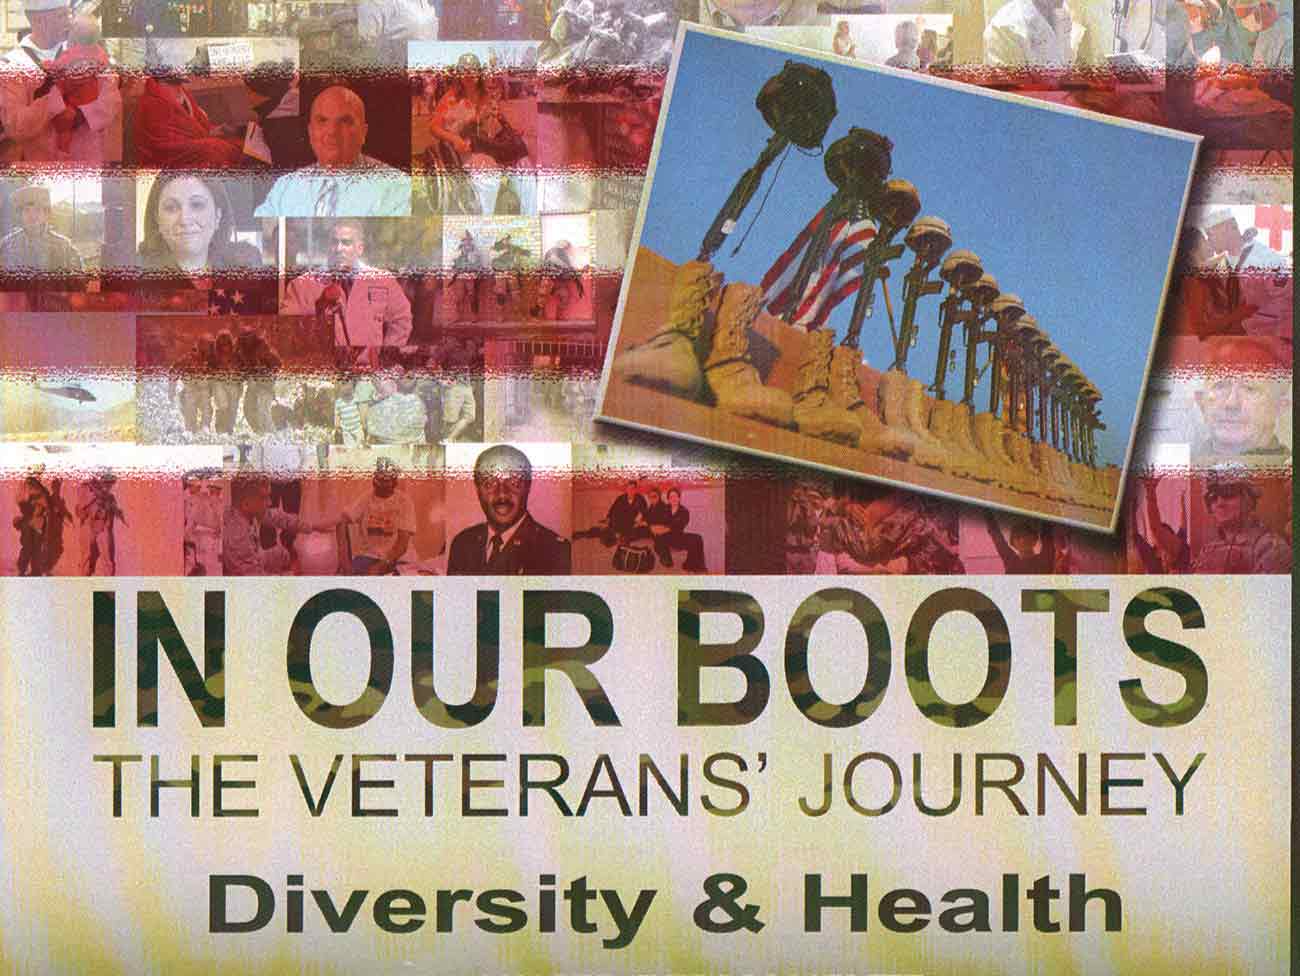 “In Our Boots” DVD cover